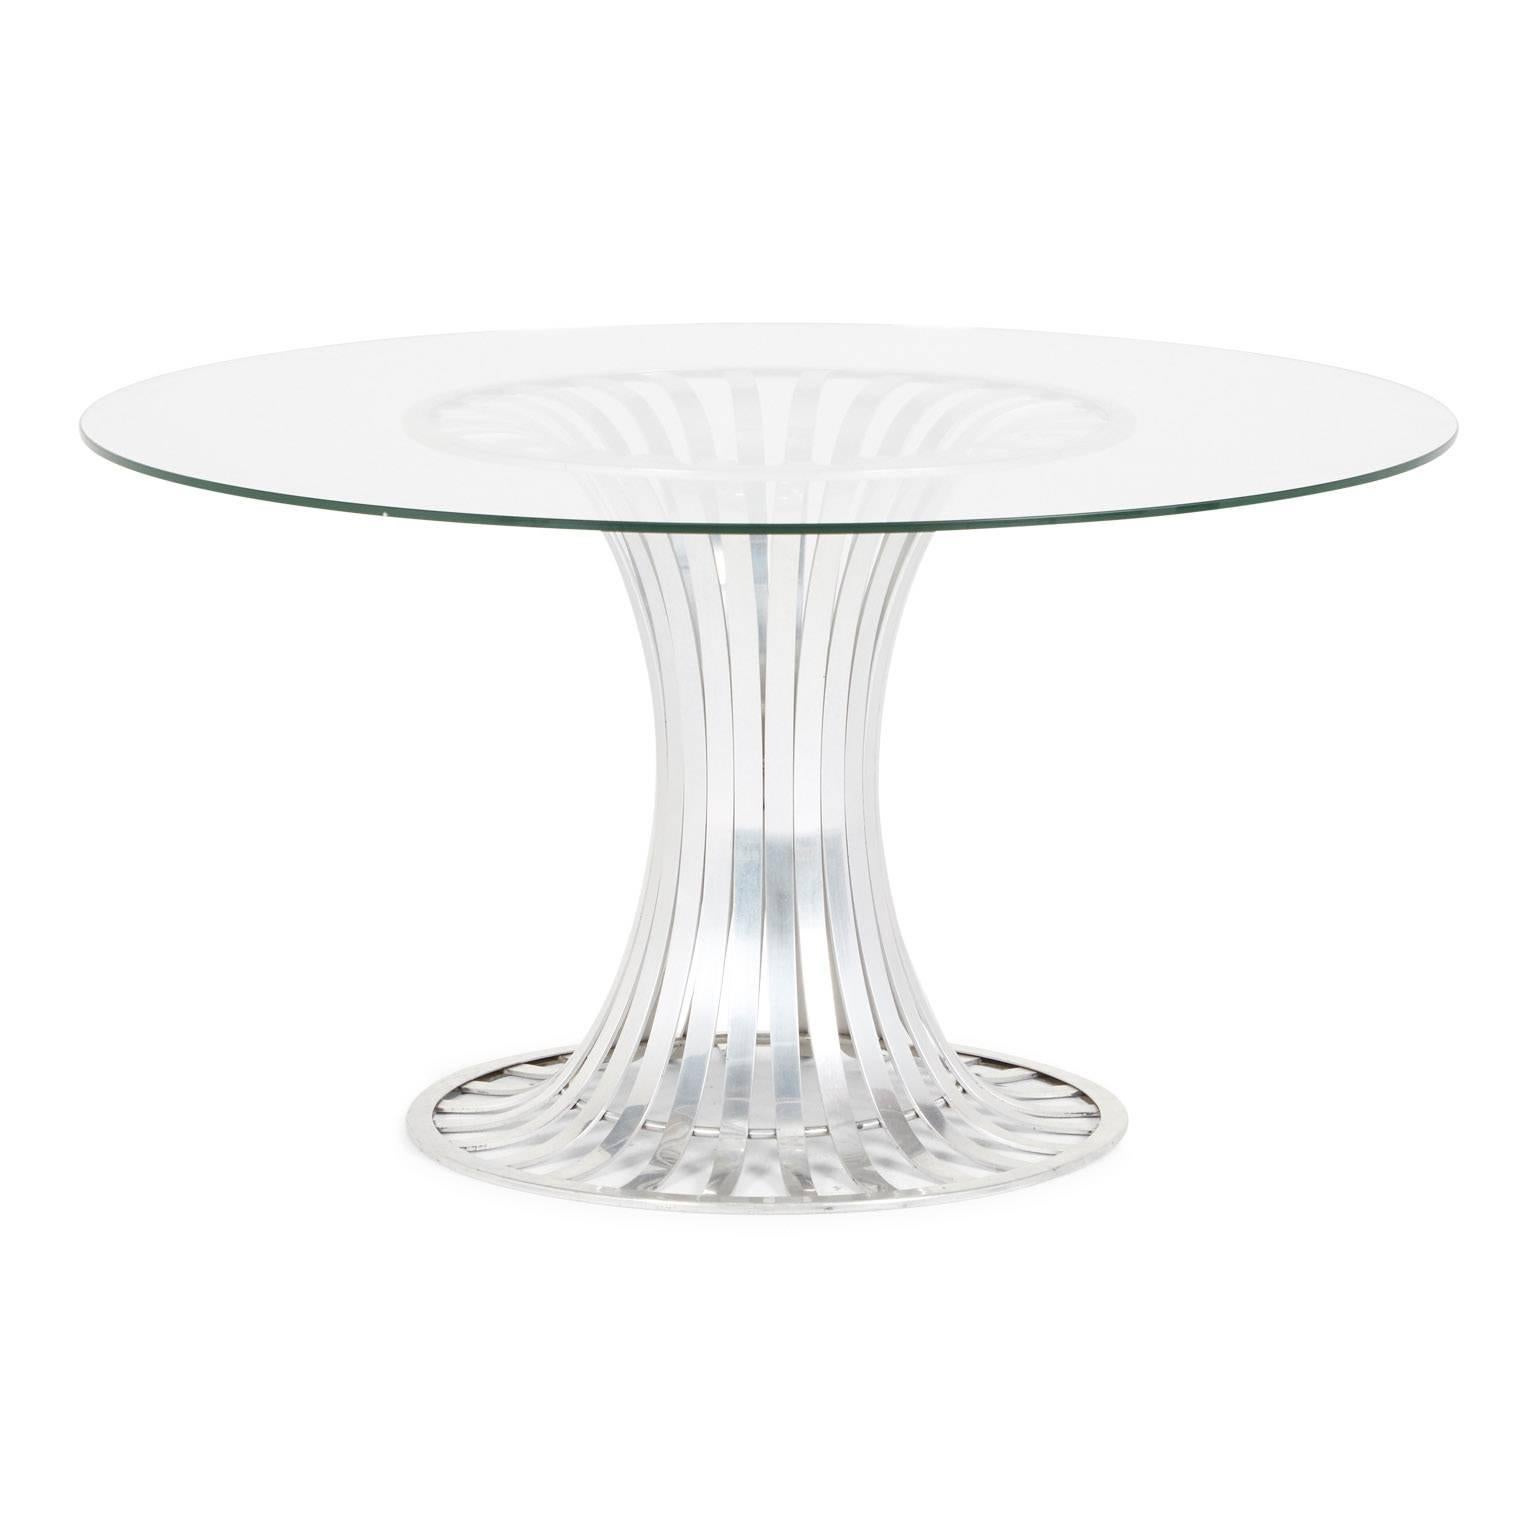 Designed by Russell Woodard and produced in the early 1960s by the Woodard Furniture Company, this sleek aluminium dining table with glass top can be used indoors or out.

The current glass top is 42